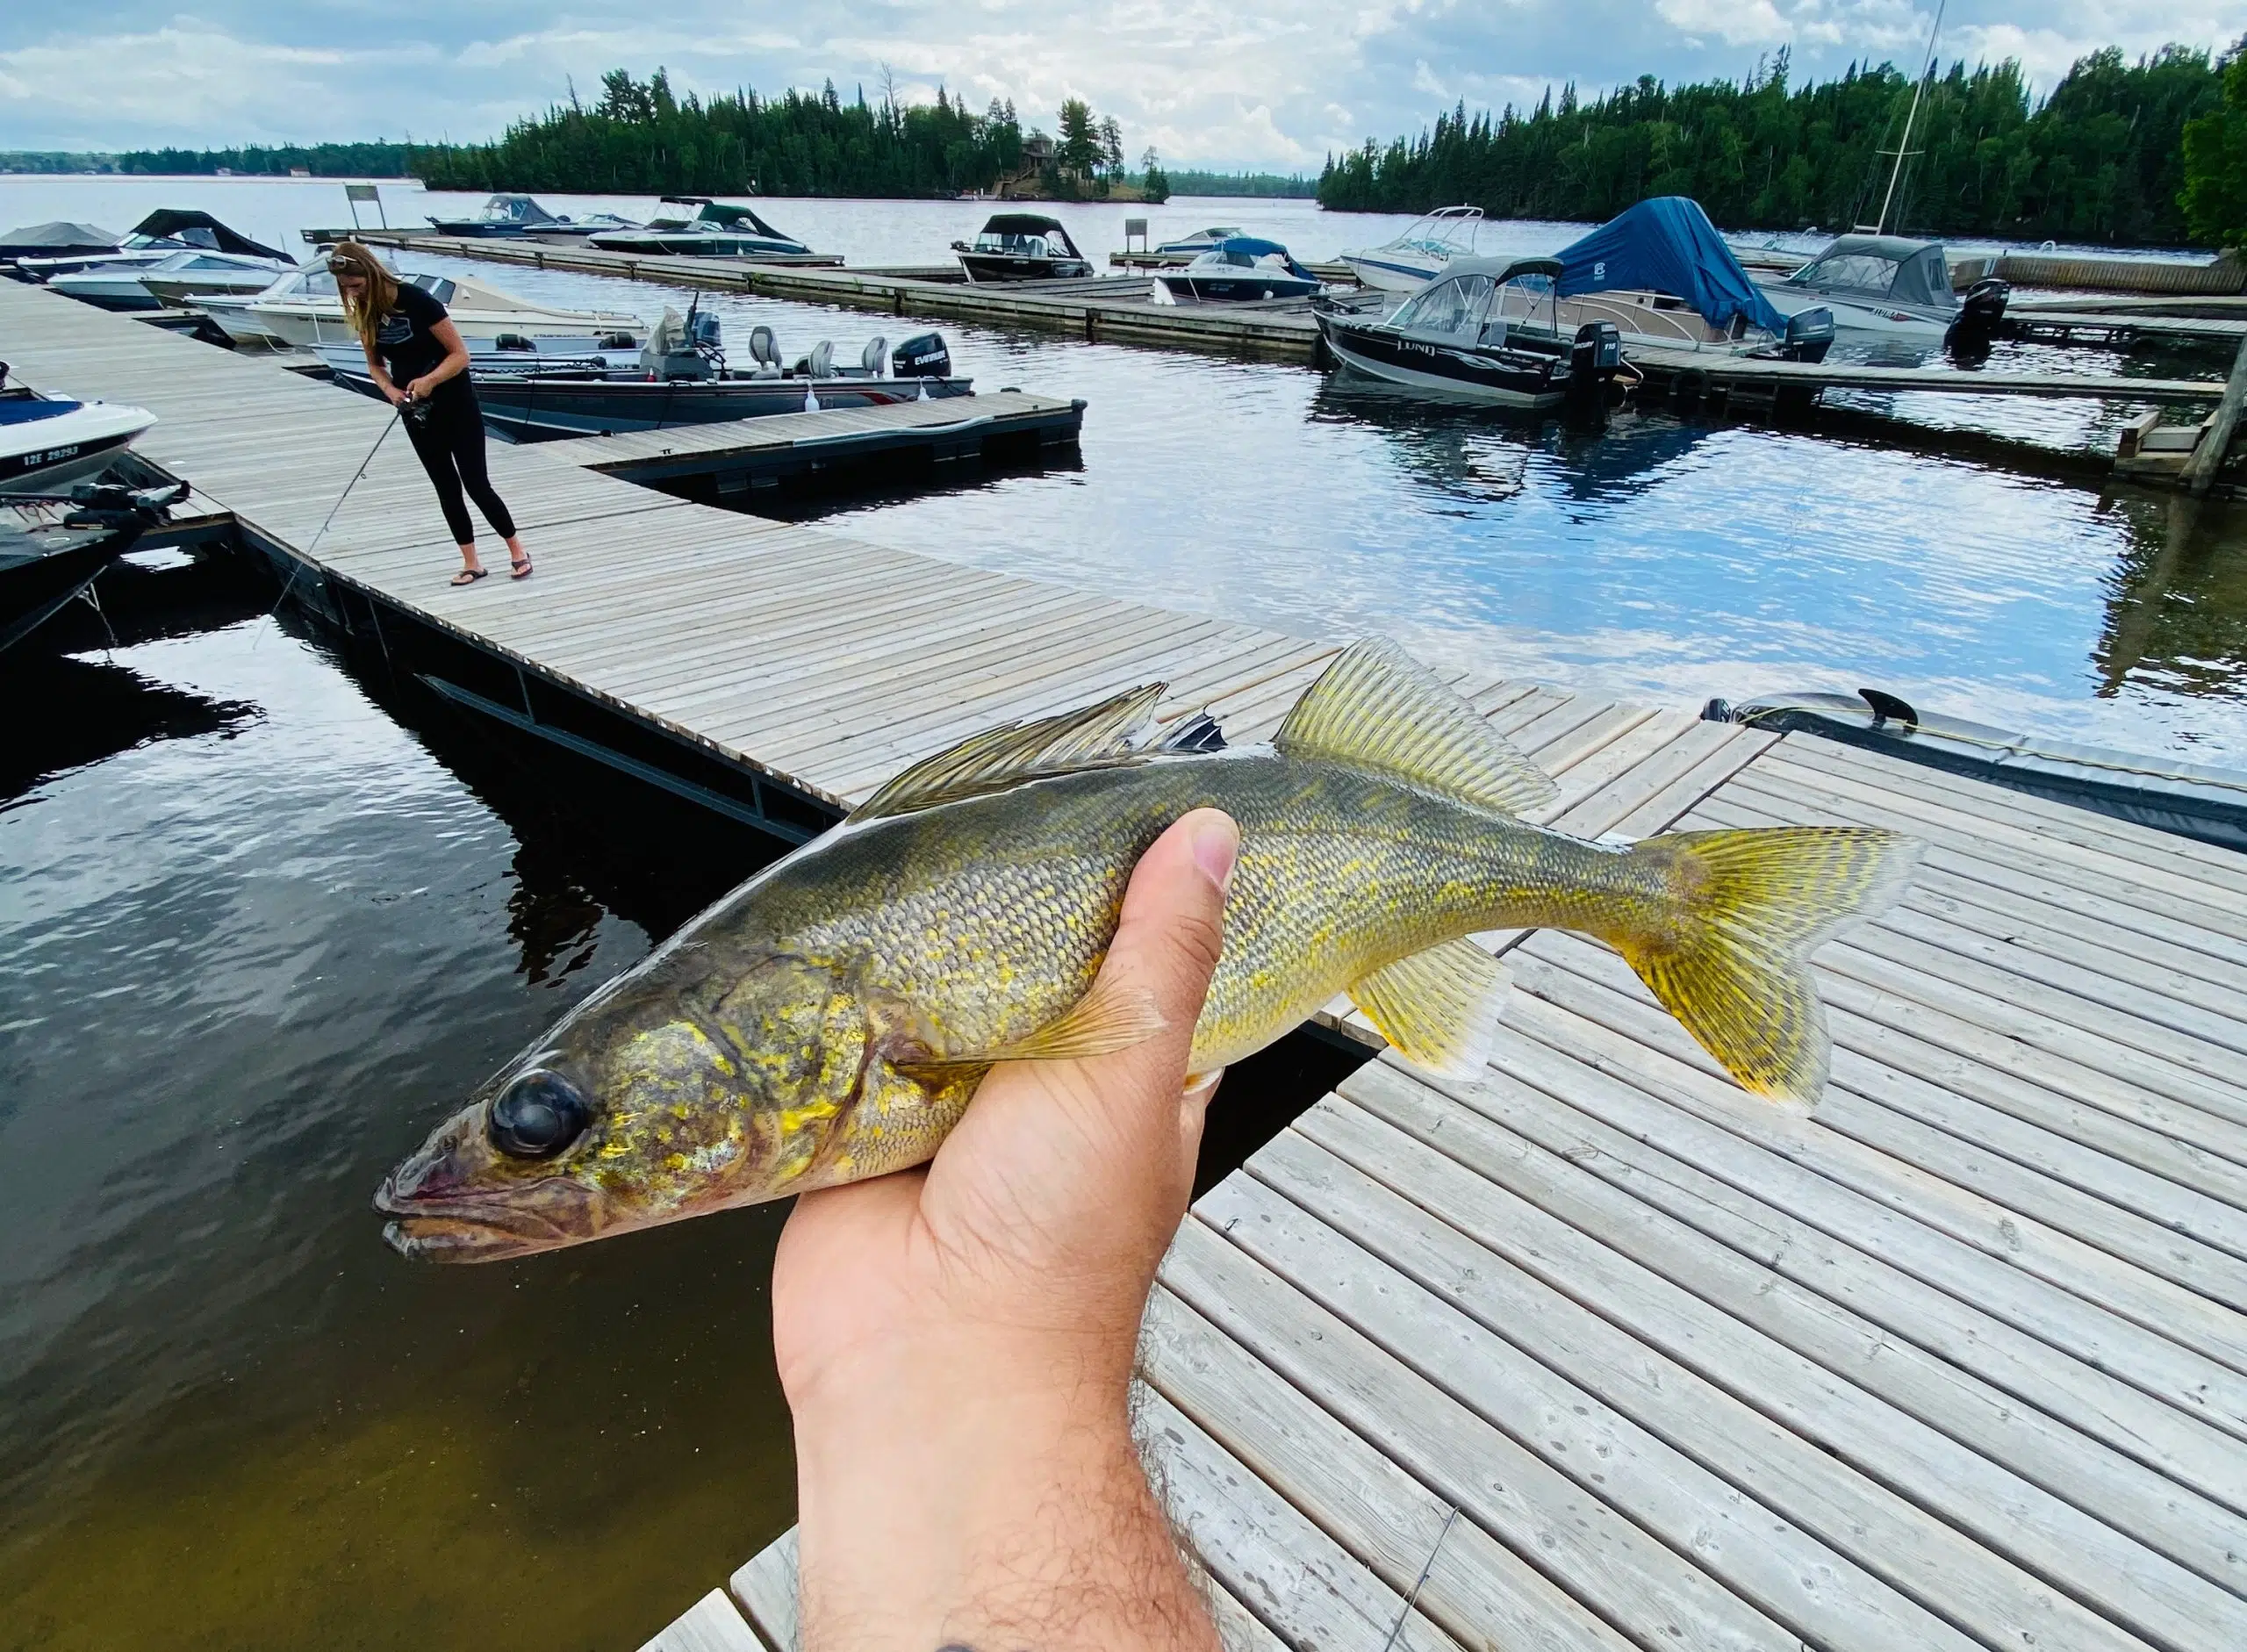 $10,000 in fines after 40 walleye seized from angler